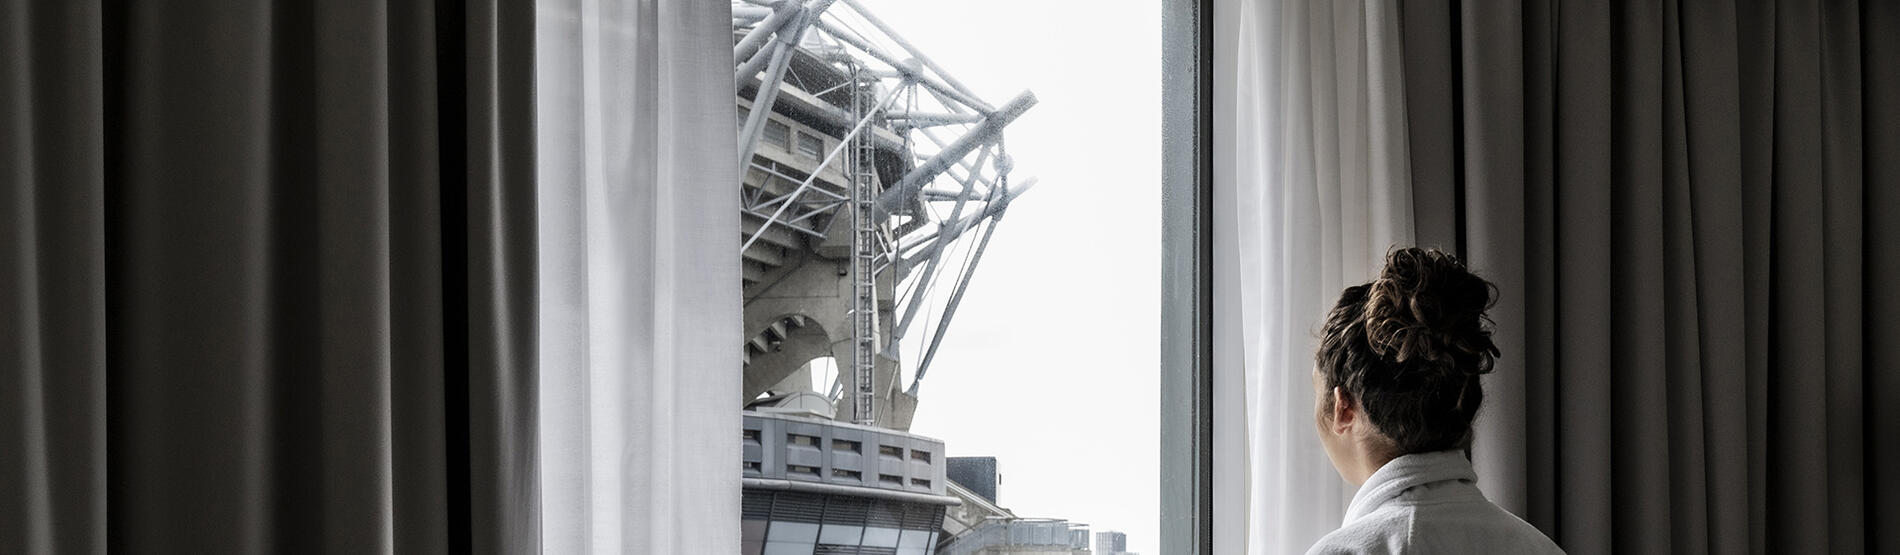 A guest admiring the view of Croke Park stadium